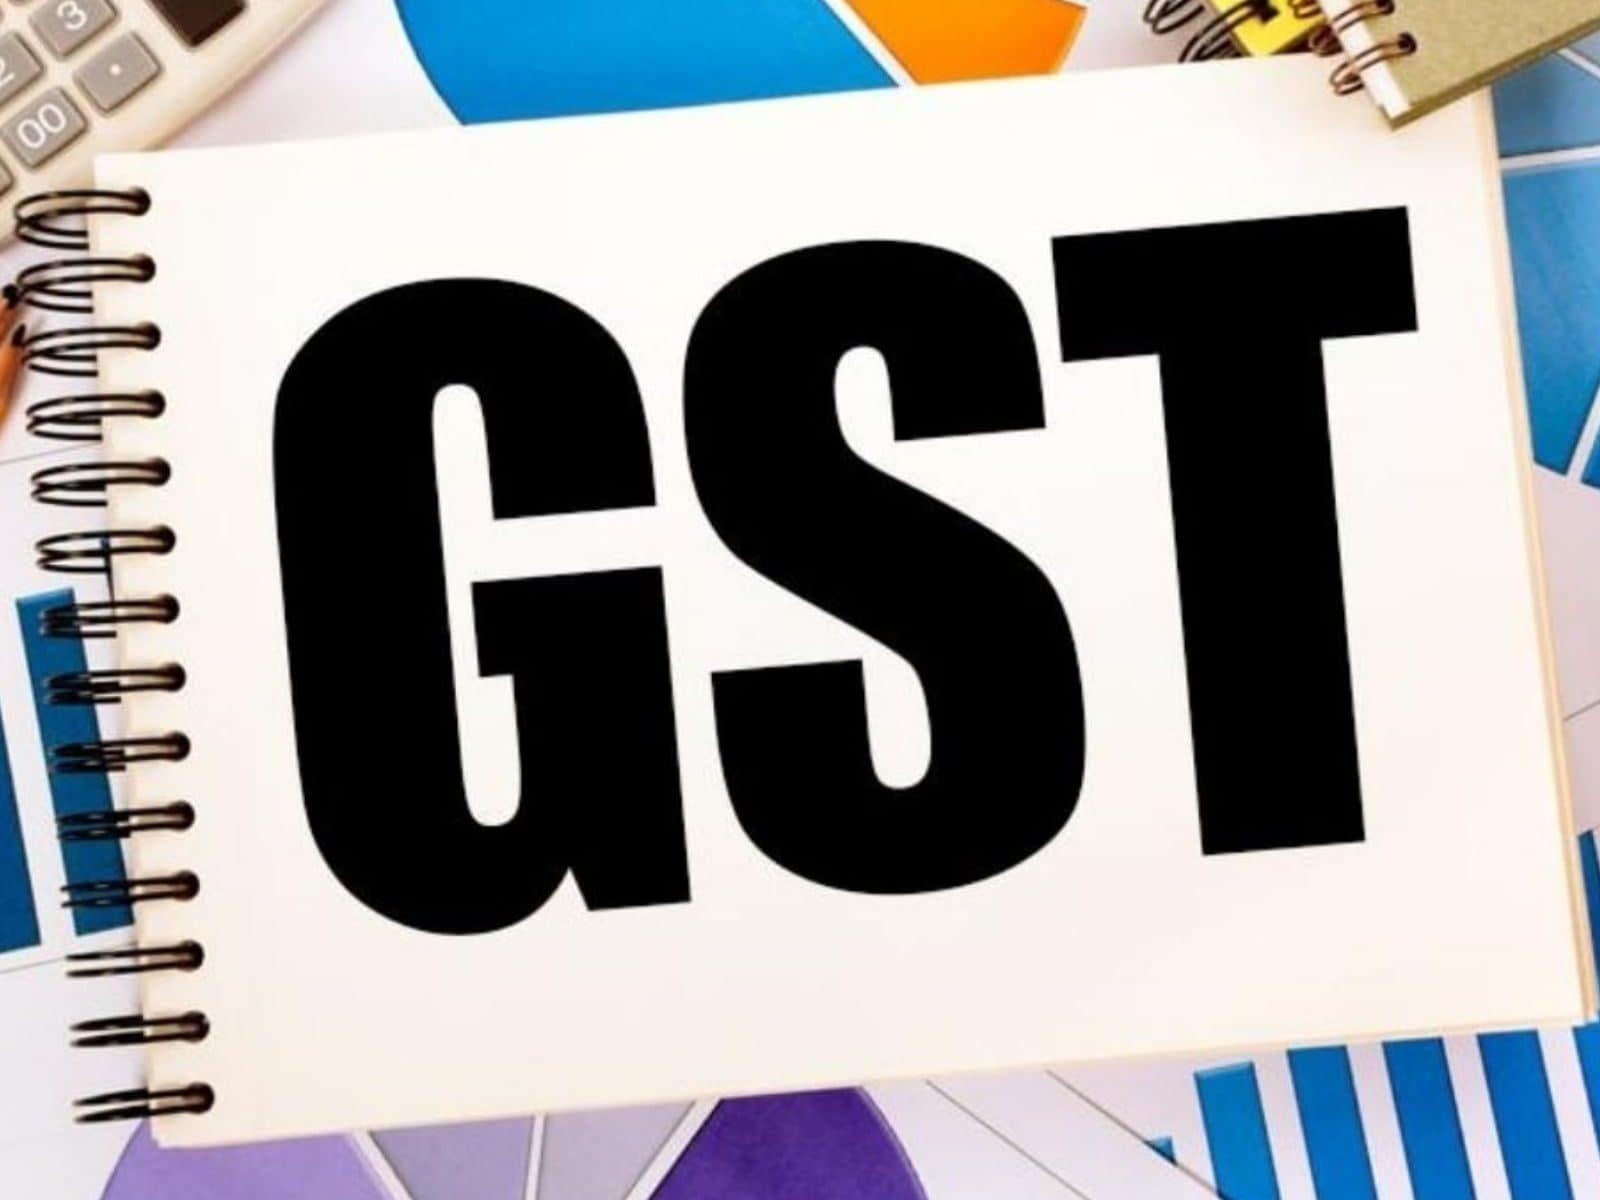 Maharashtra: Voluntary payment by outgoing society member subject to GST, says AAR